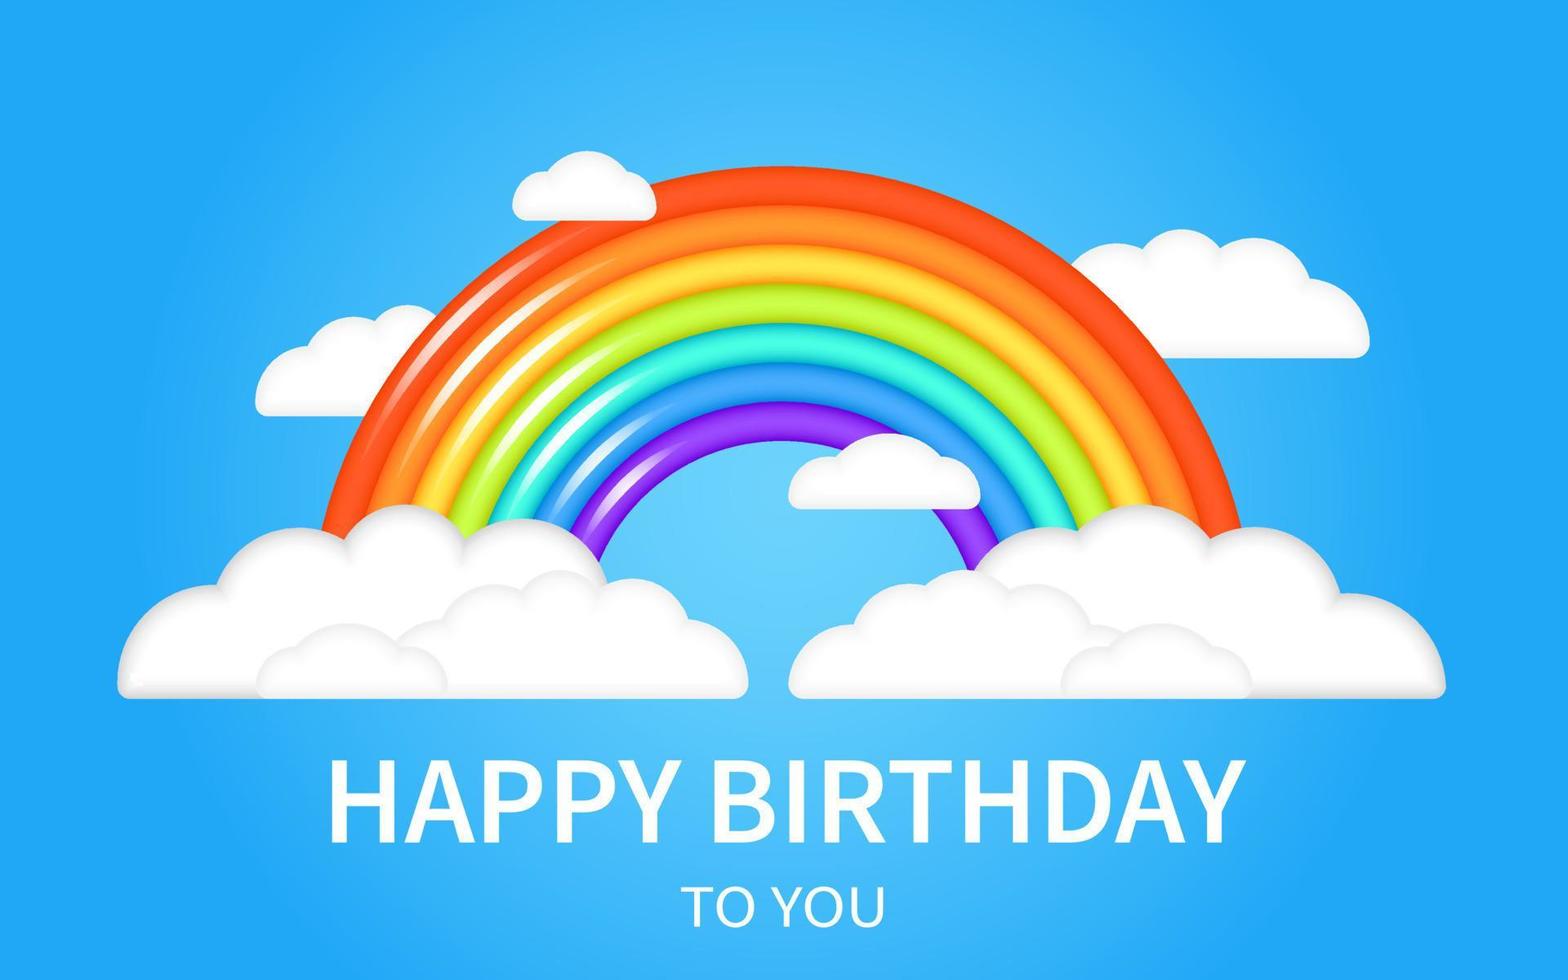 Beautiful summer 3d fluffy clouds in the blue sky with realistic 3d rainbow. Children vector illustration. Three dimensional style. Happy Birthday. Kids cartoon illustration for flyer or banner.